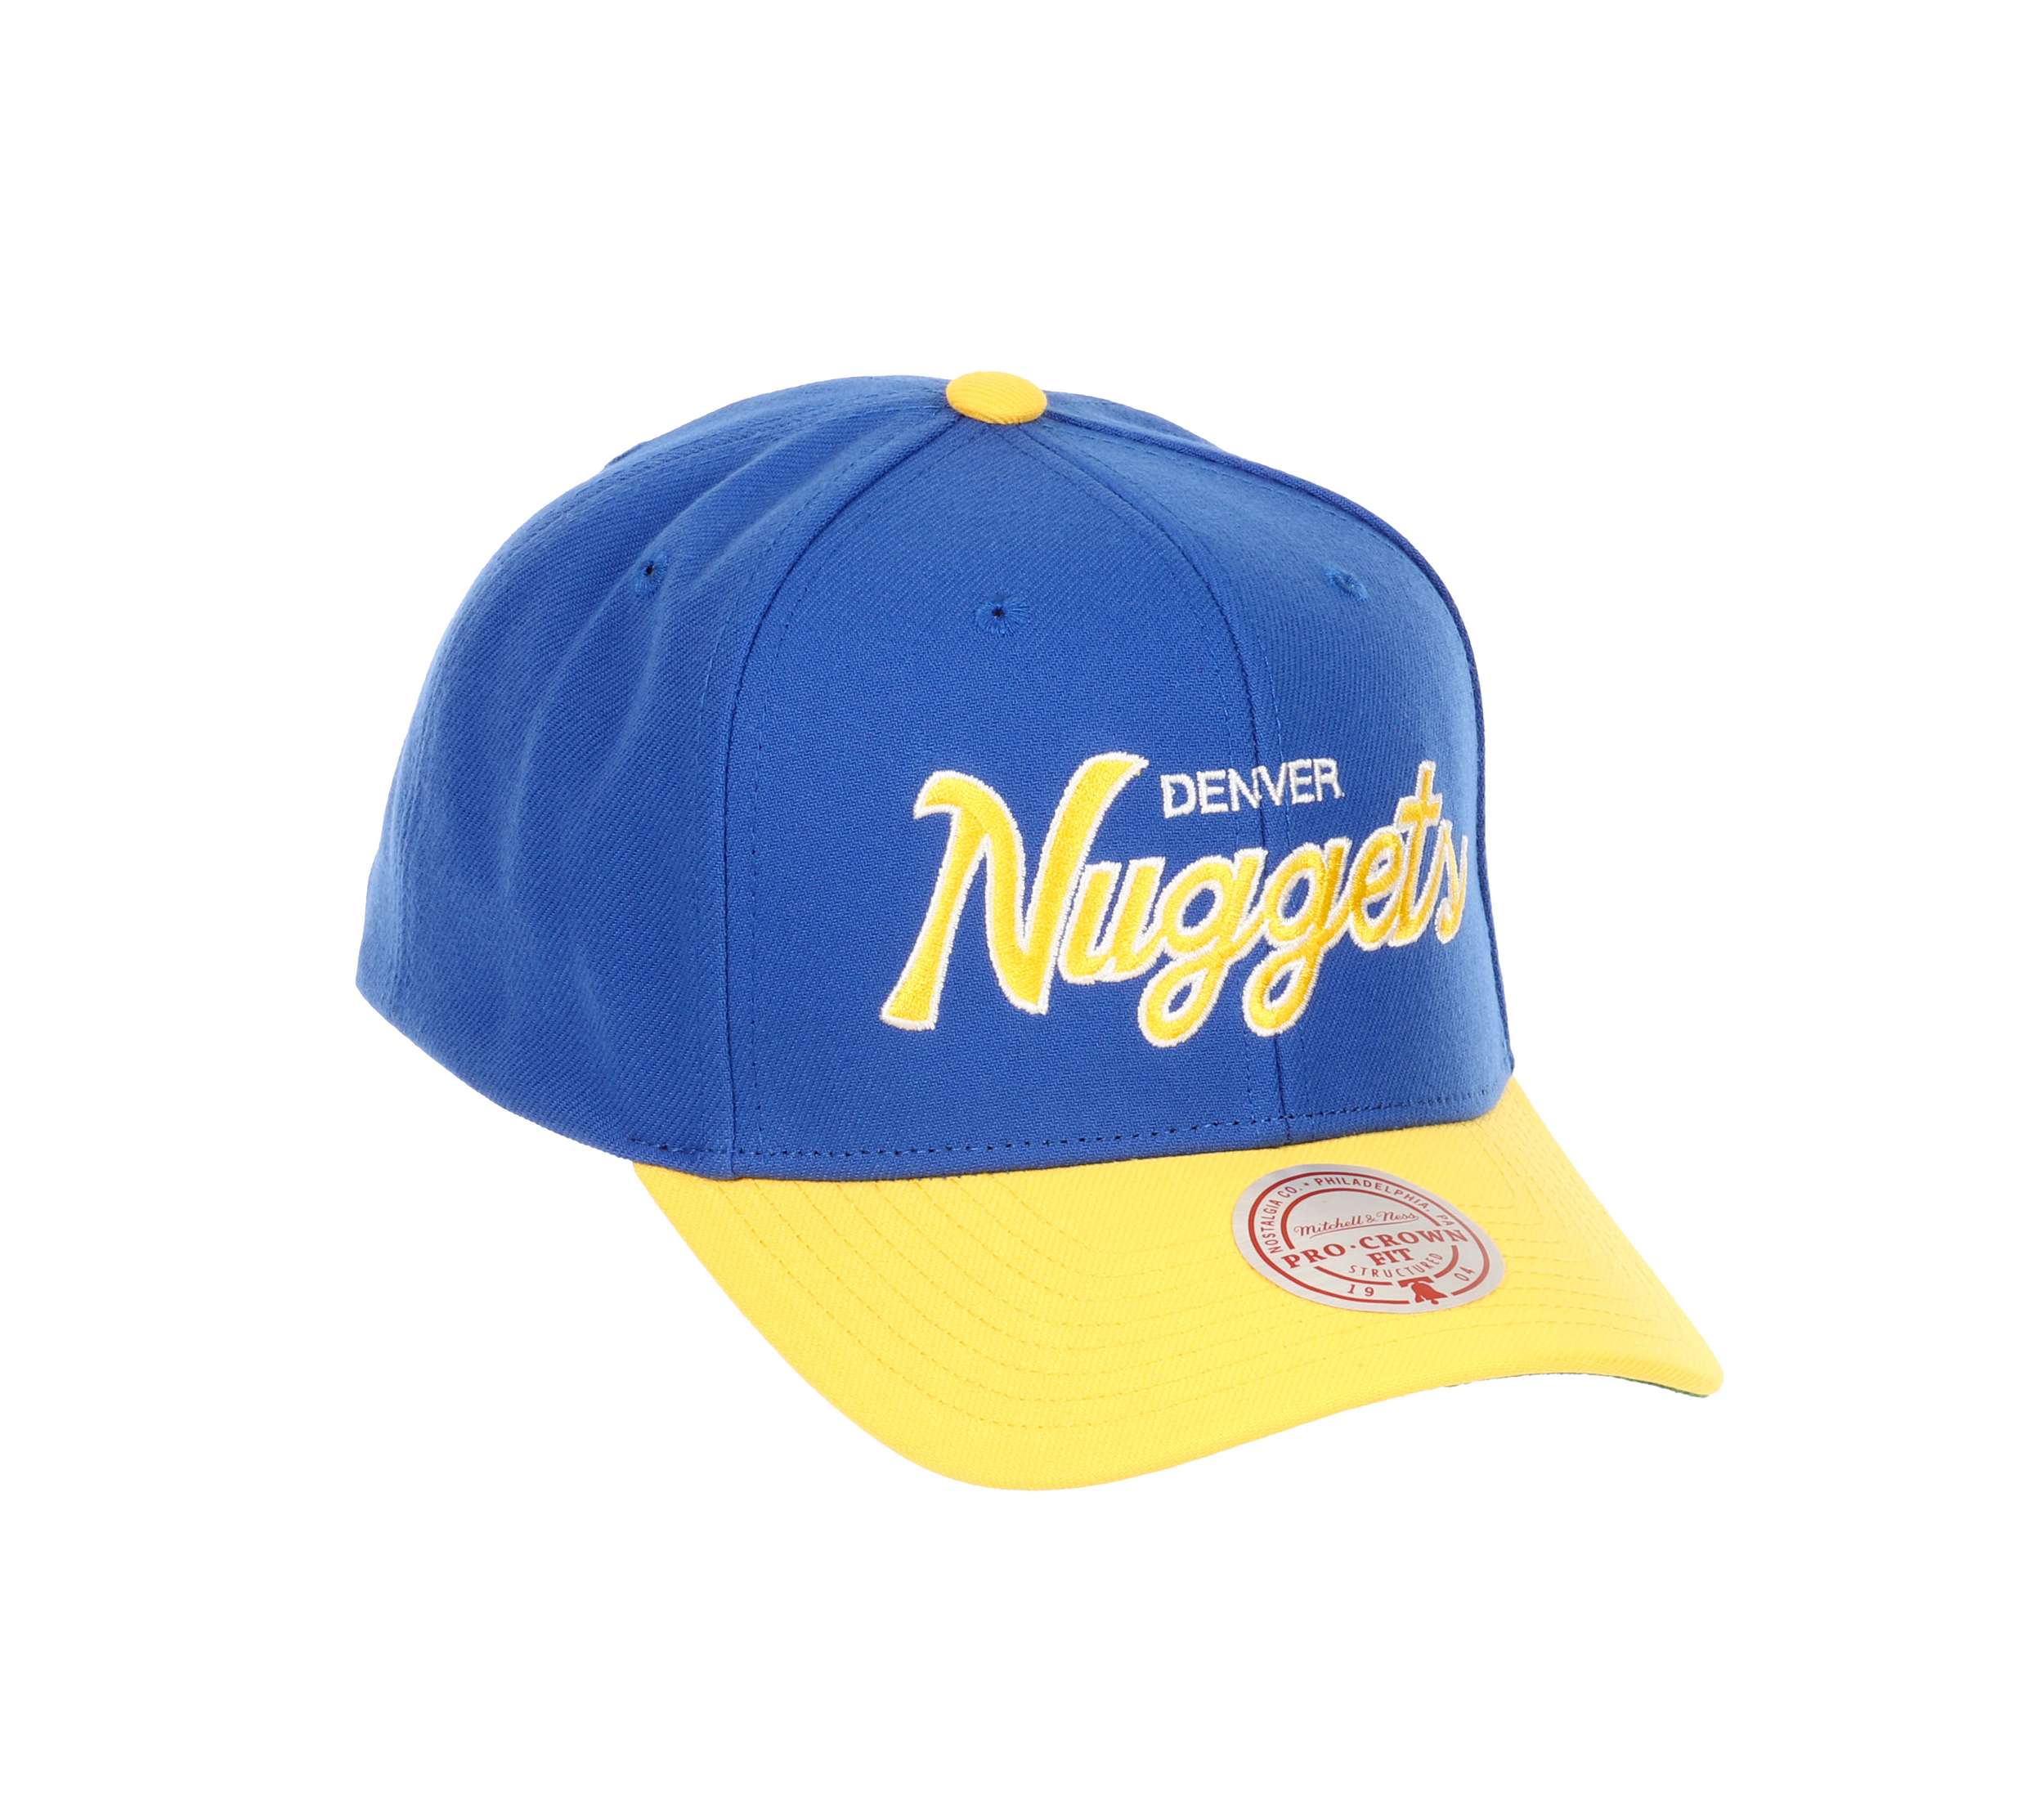 Denver Nuggets NBA Team Script 2.0 Blue Yellow Adjustable Curved Snapback Cap Mitchell & Ness